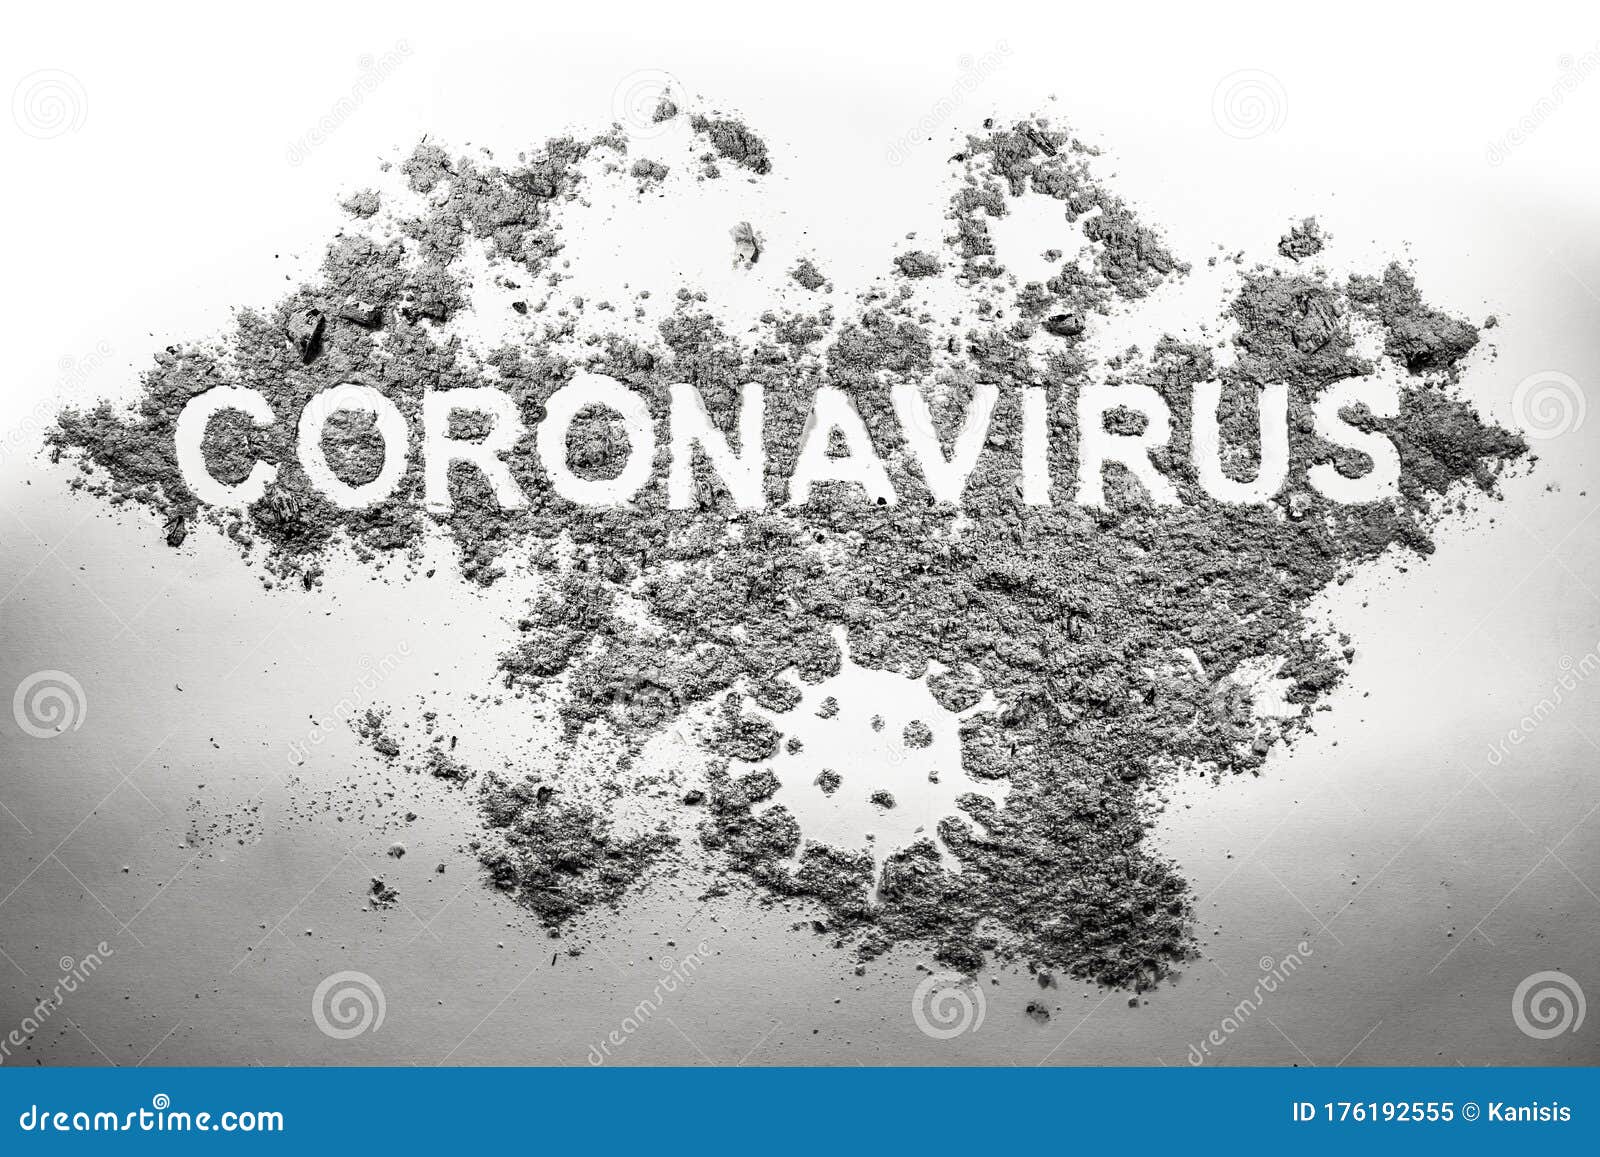 coronavirus word and germ microbe silhouette drawing made in dirt, filth